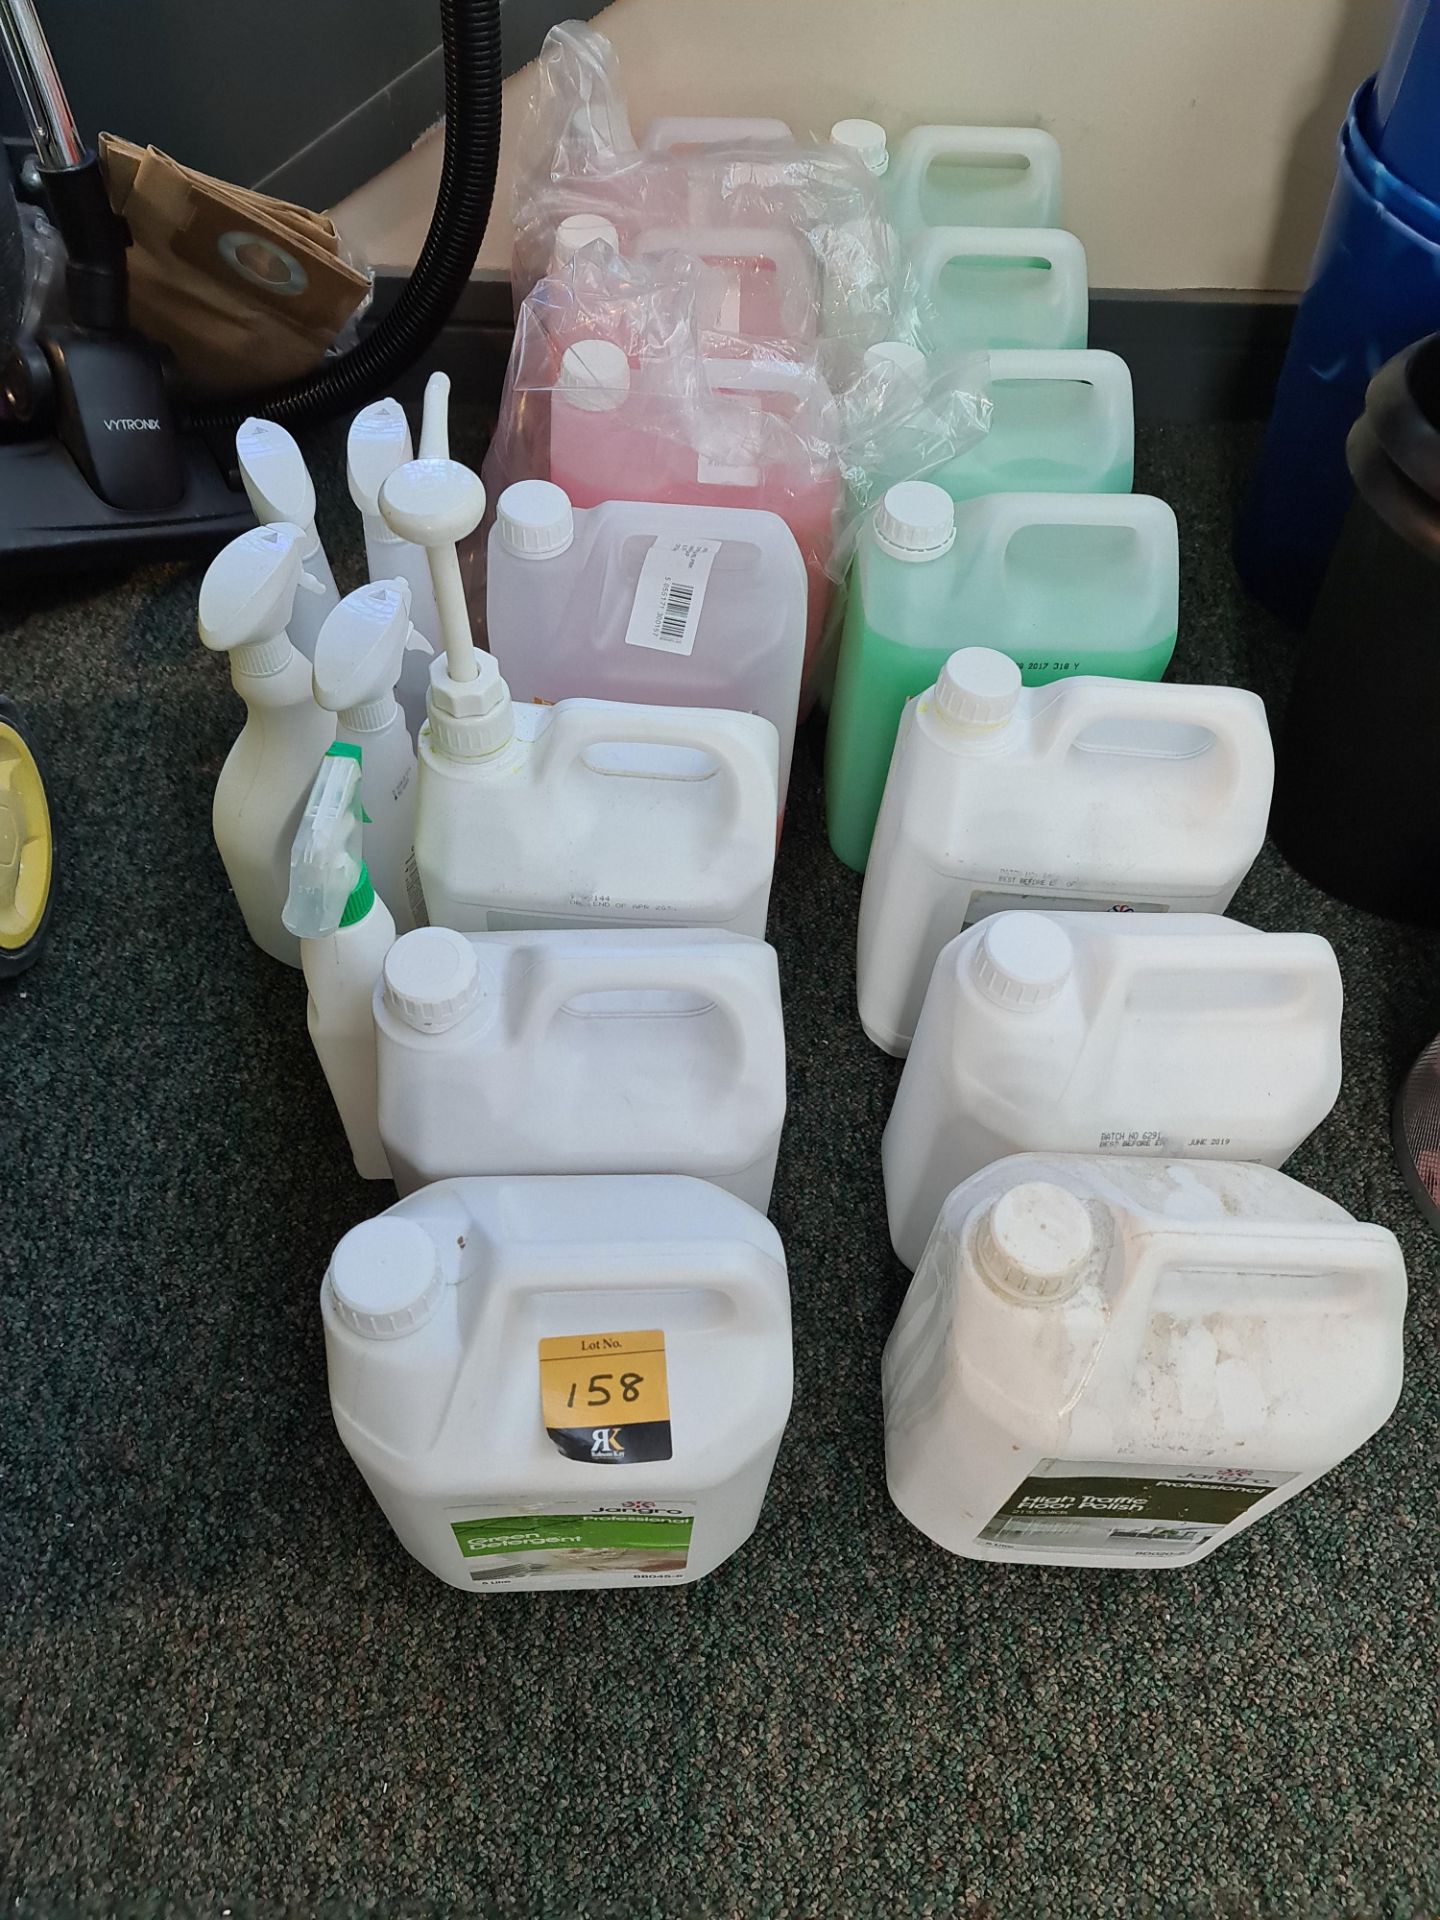 Quantity of assorted cleaning fluids including High Traffic Floor Polish, detergent, handwashing lot